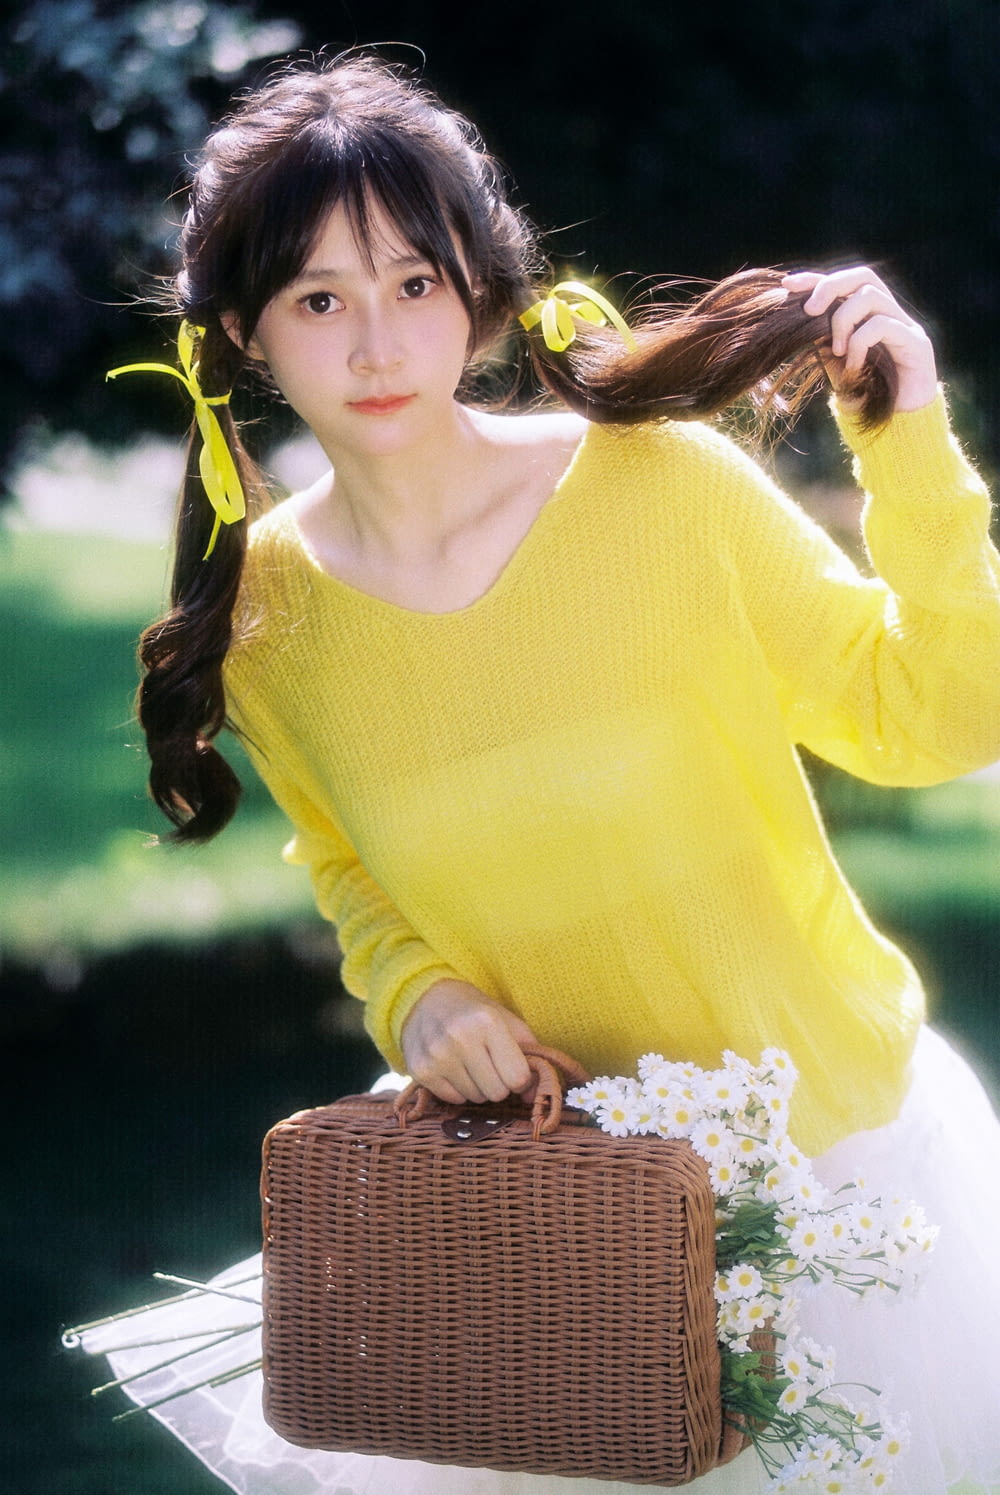 a woman in a yellow sweater holding a suitcase